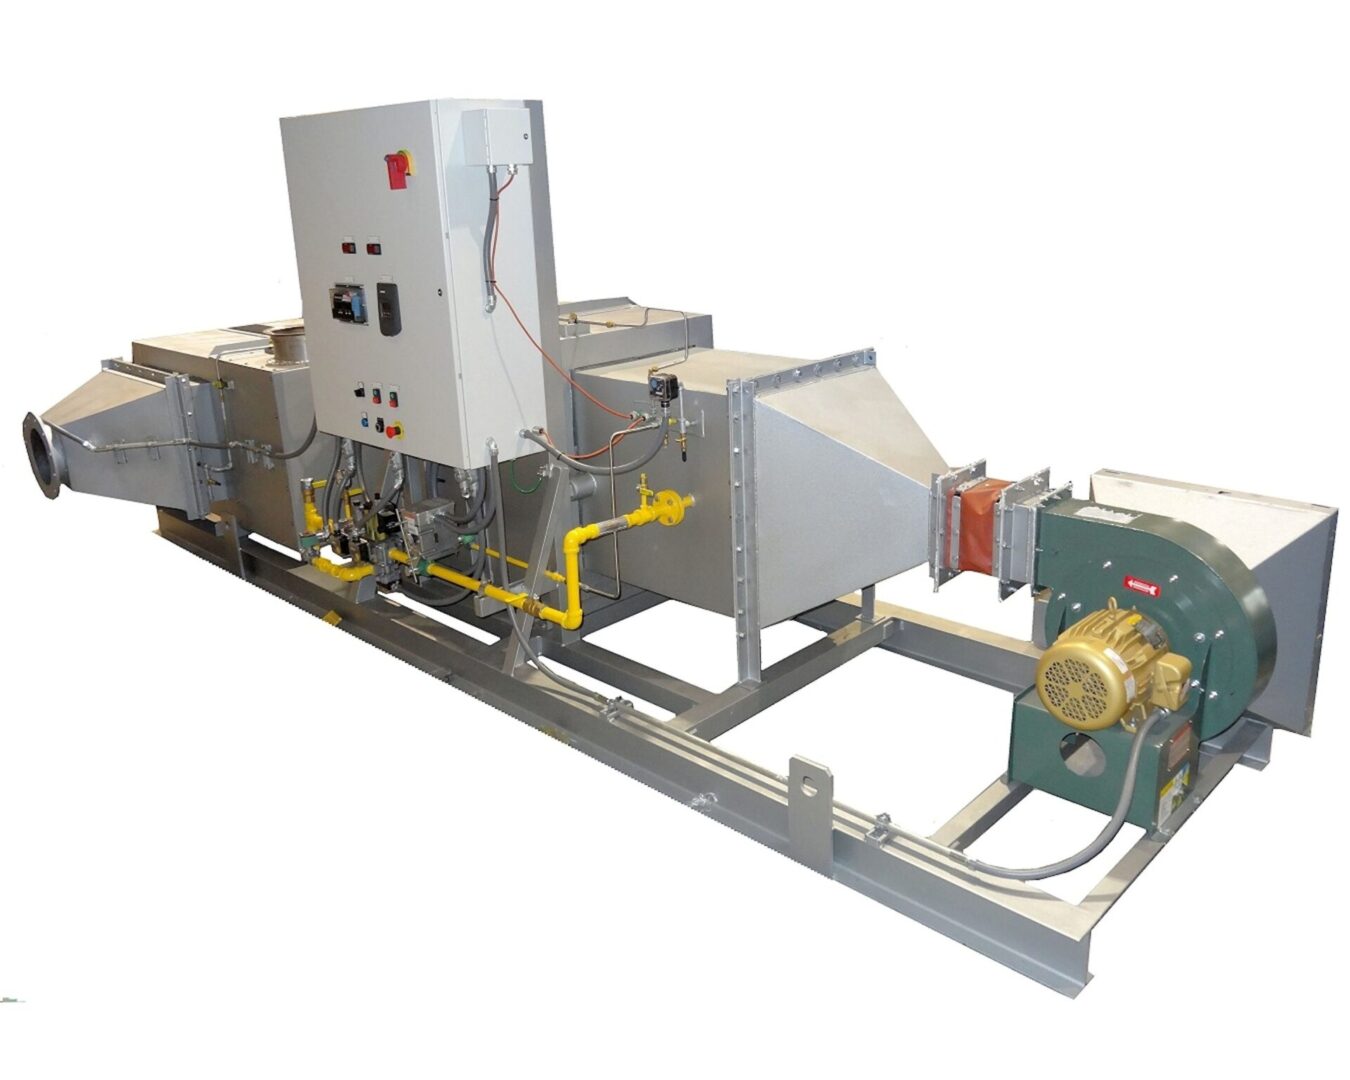 Non-Recirculating Indirect Fired Process Air Heater.